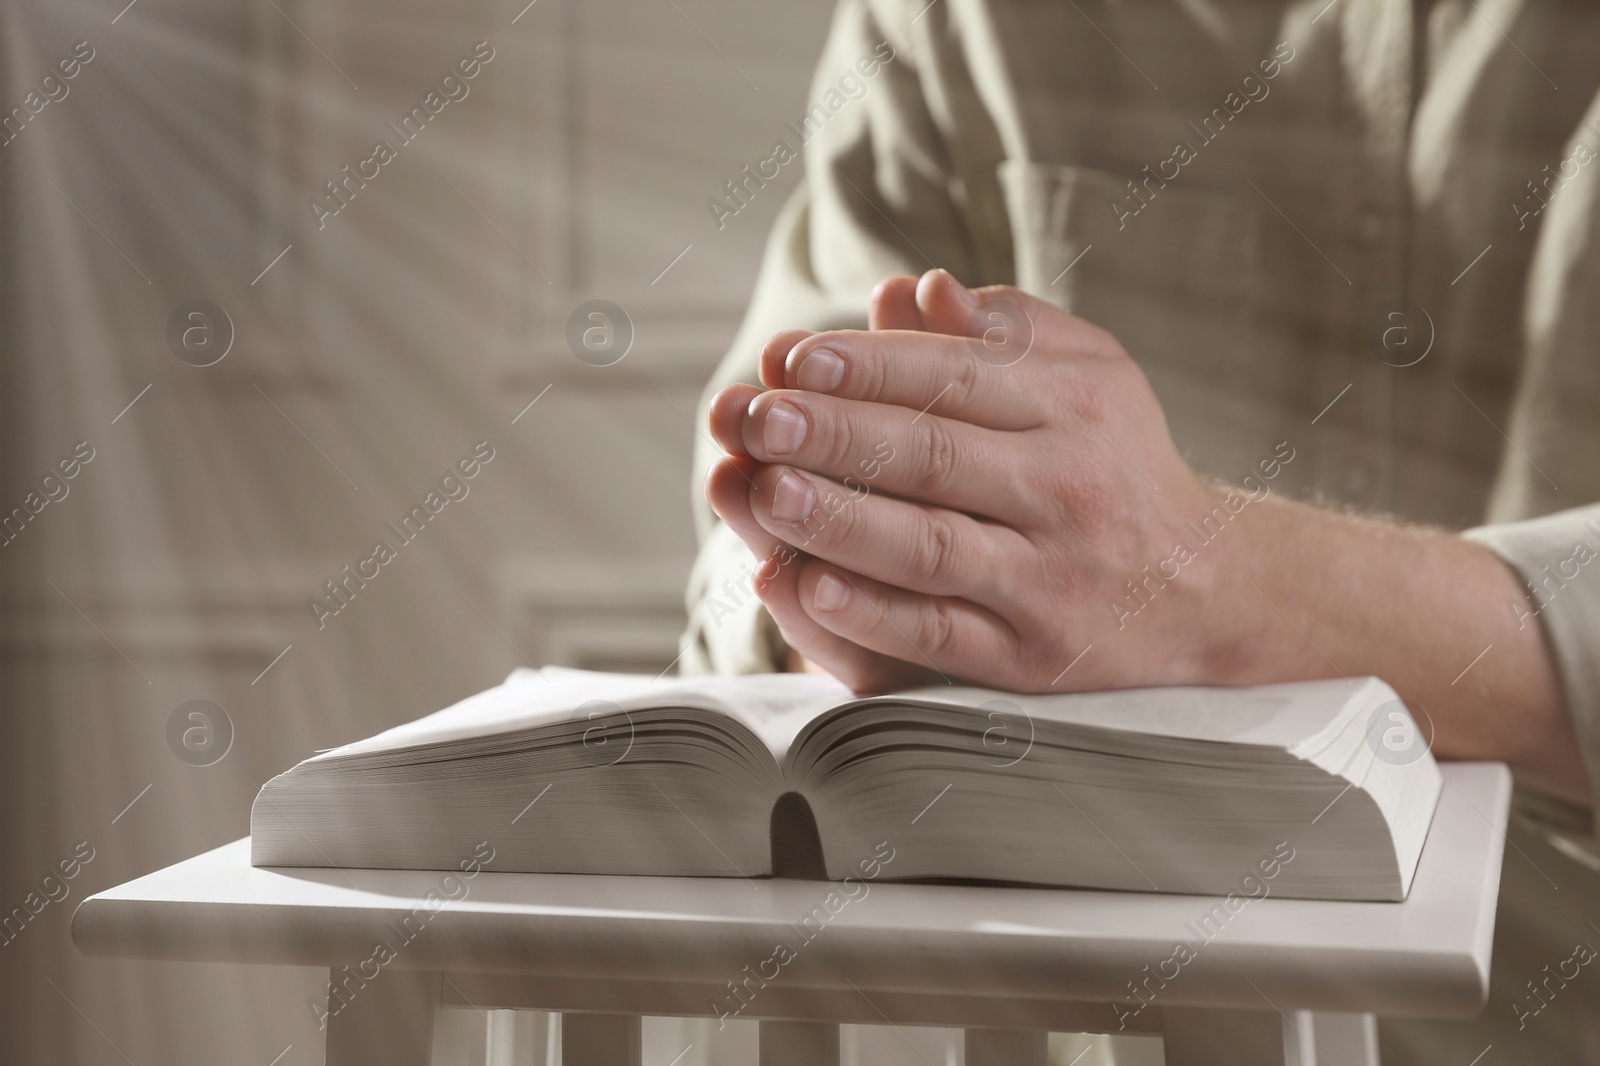 Image of Religion. Christian man praying over Bible at table, closeup